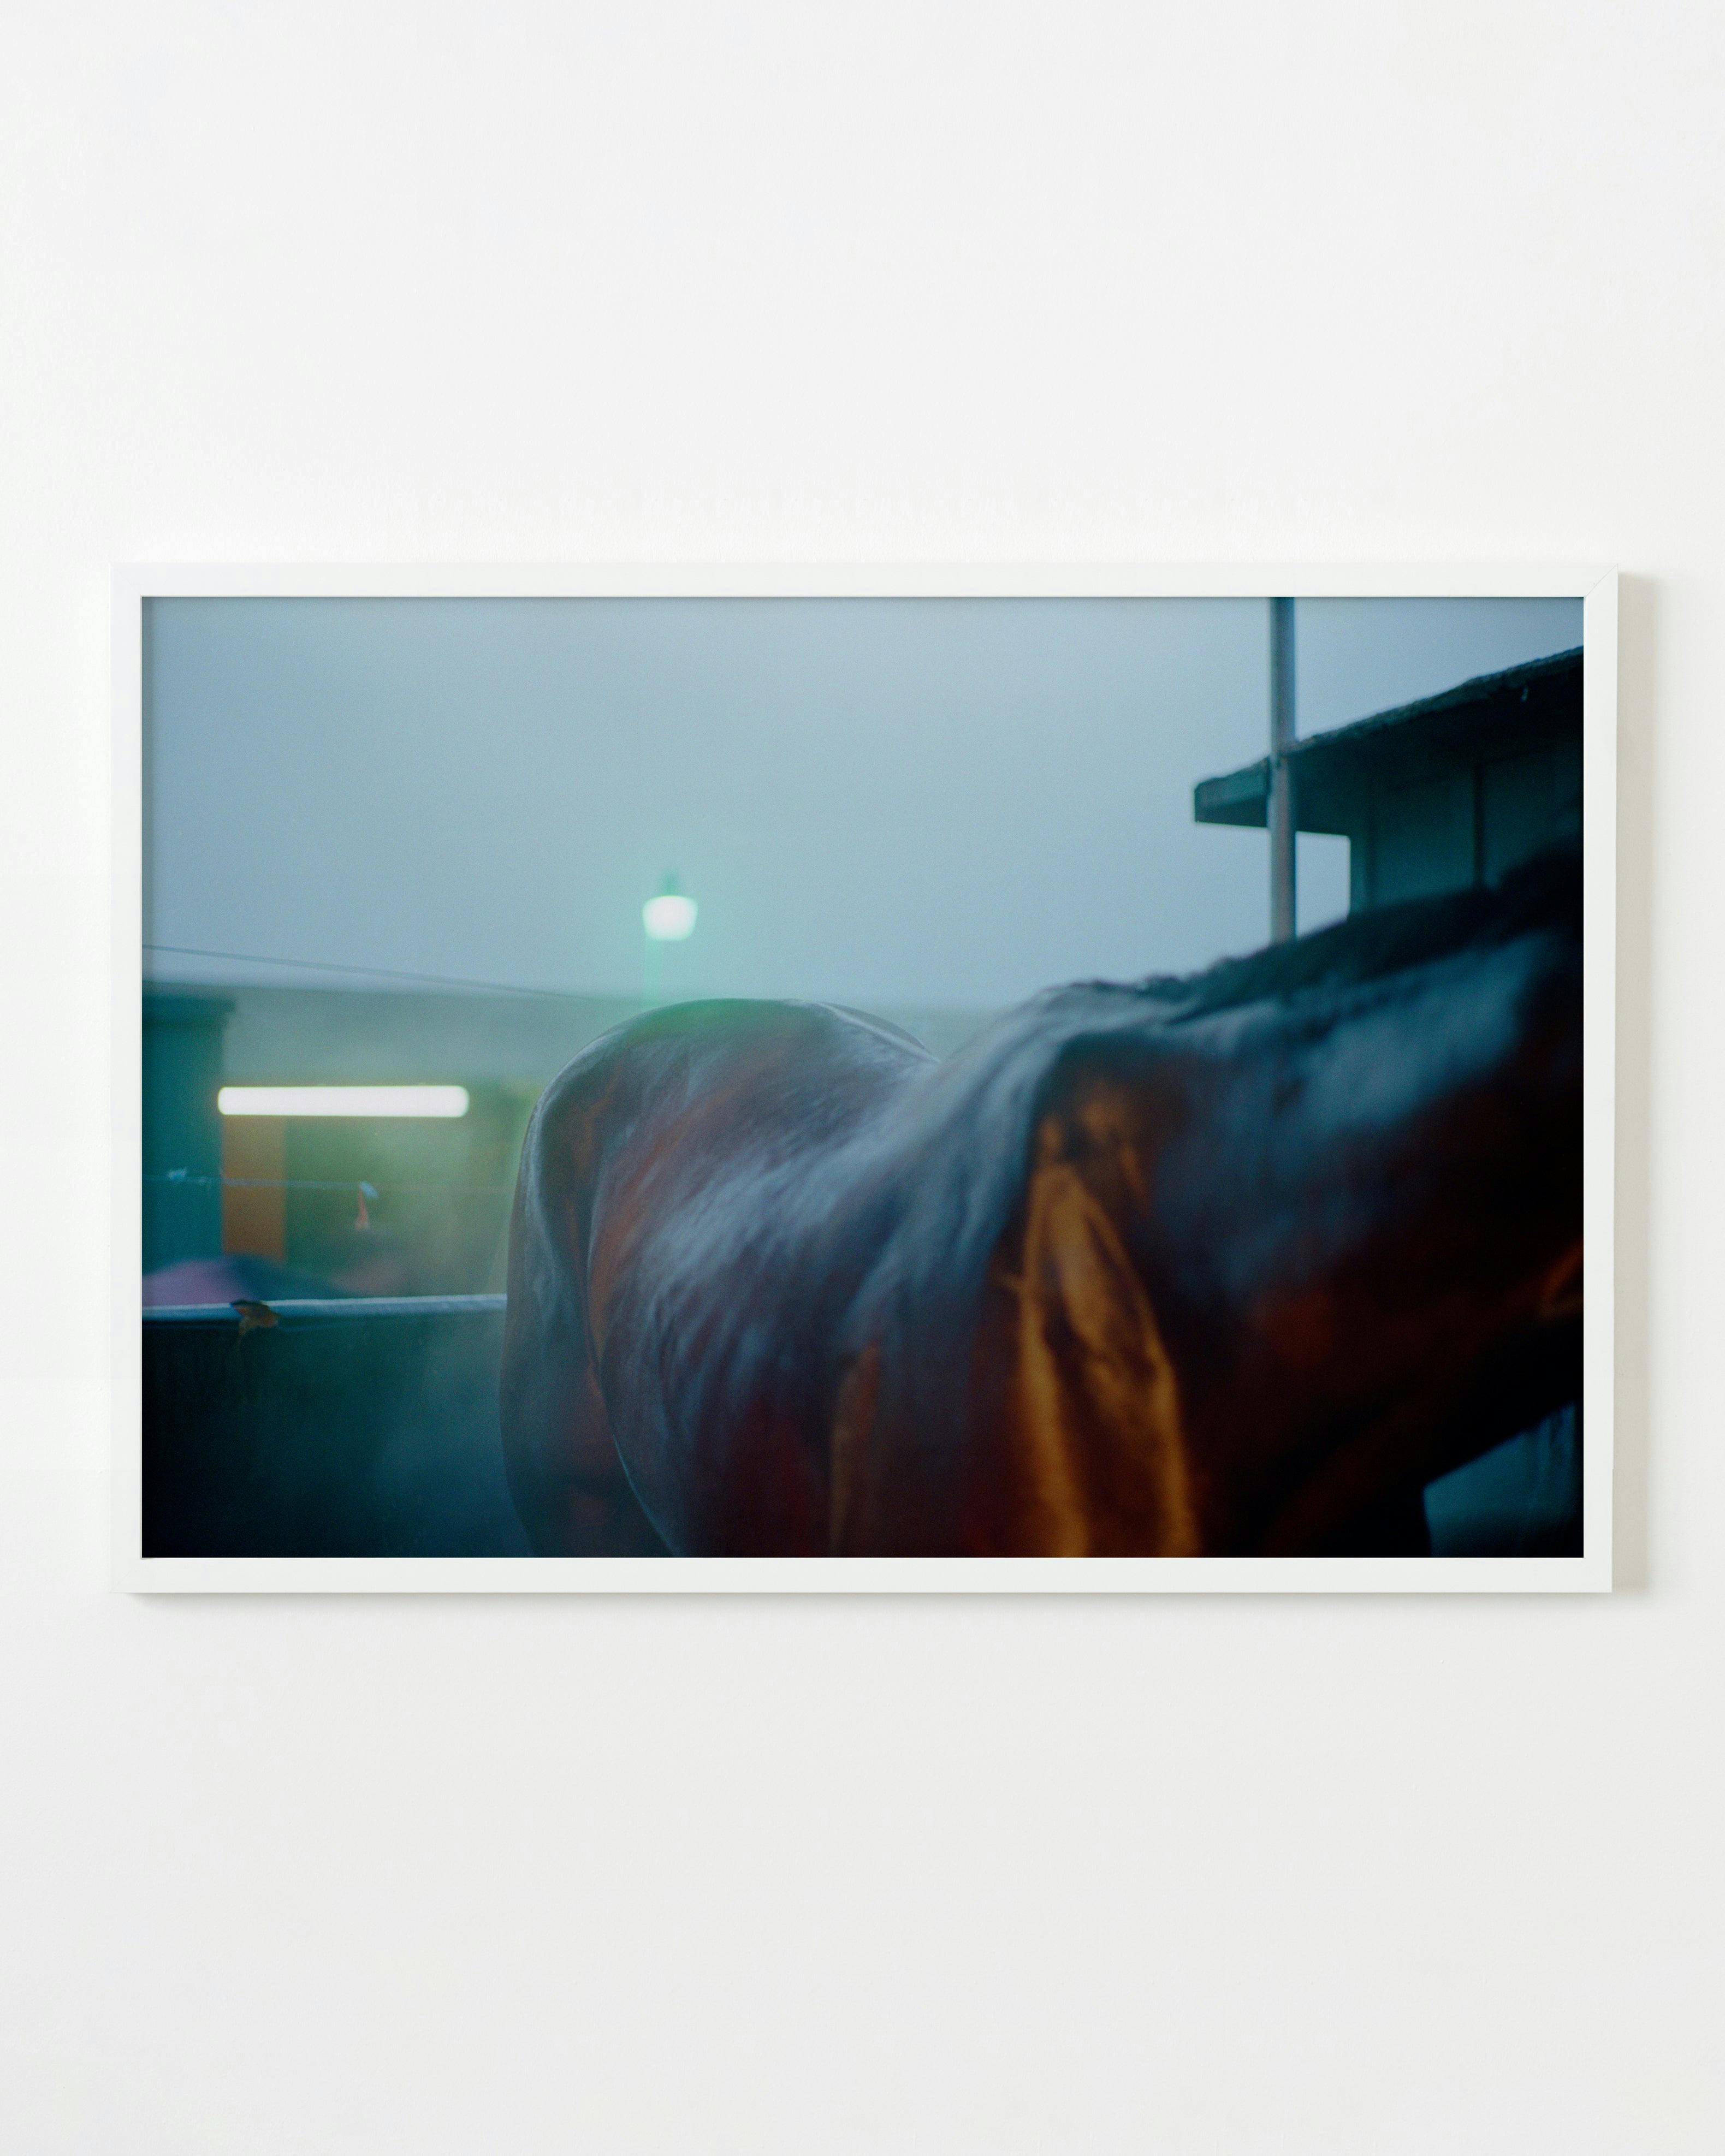 Photography by Jessica Haye & Clark Hsiao titled "Fluorescent Horse".